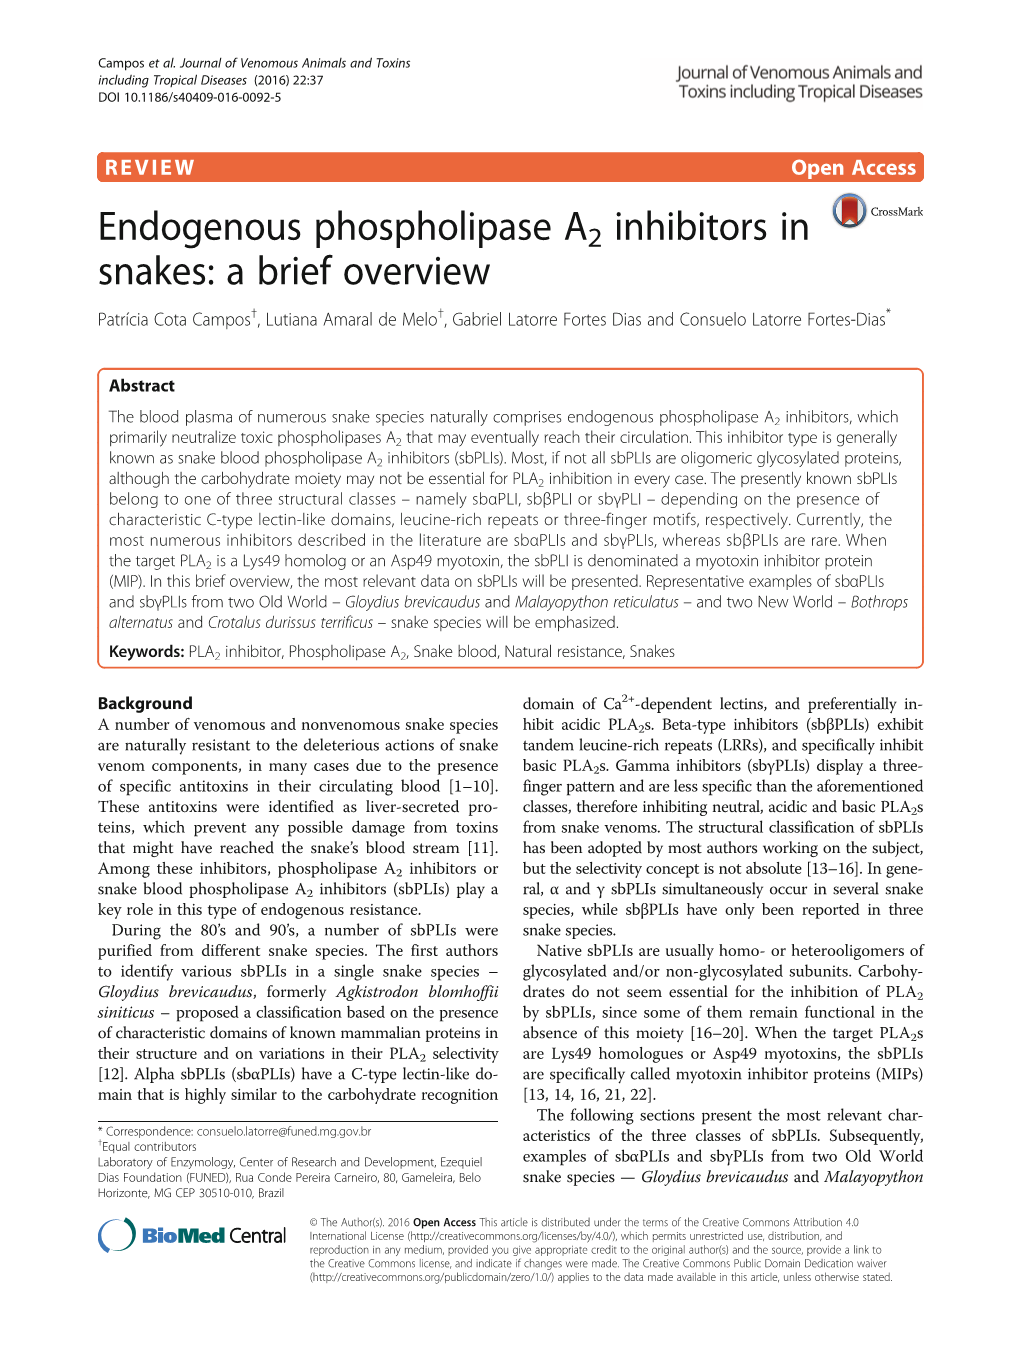 Endogenous Phospholipase A2 Inhibitors in Snakes: a Brief Overview